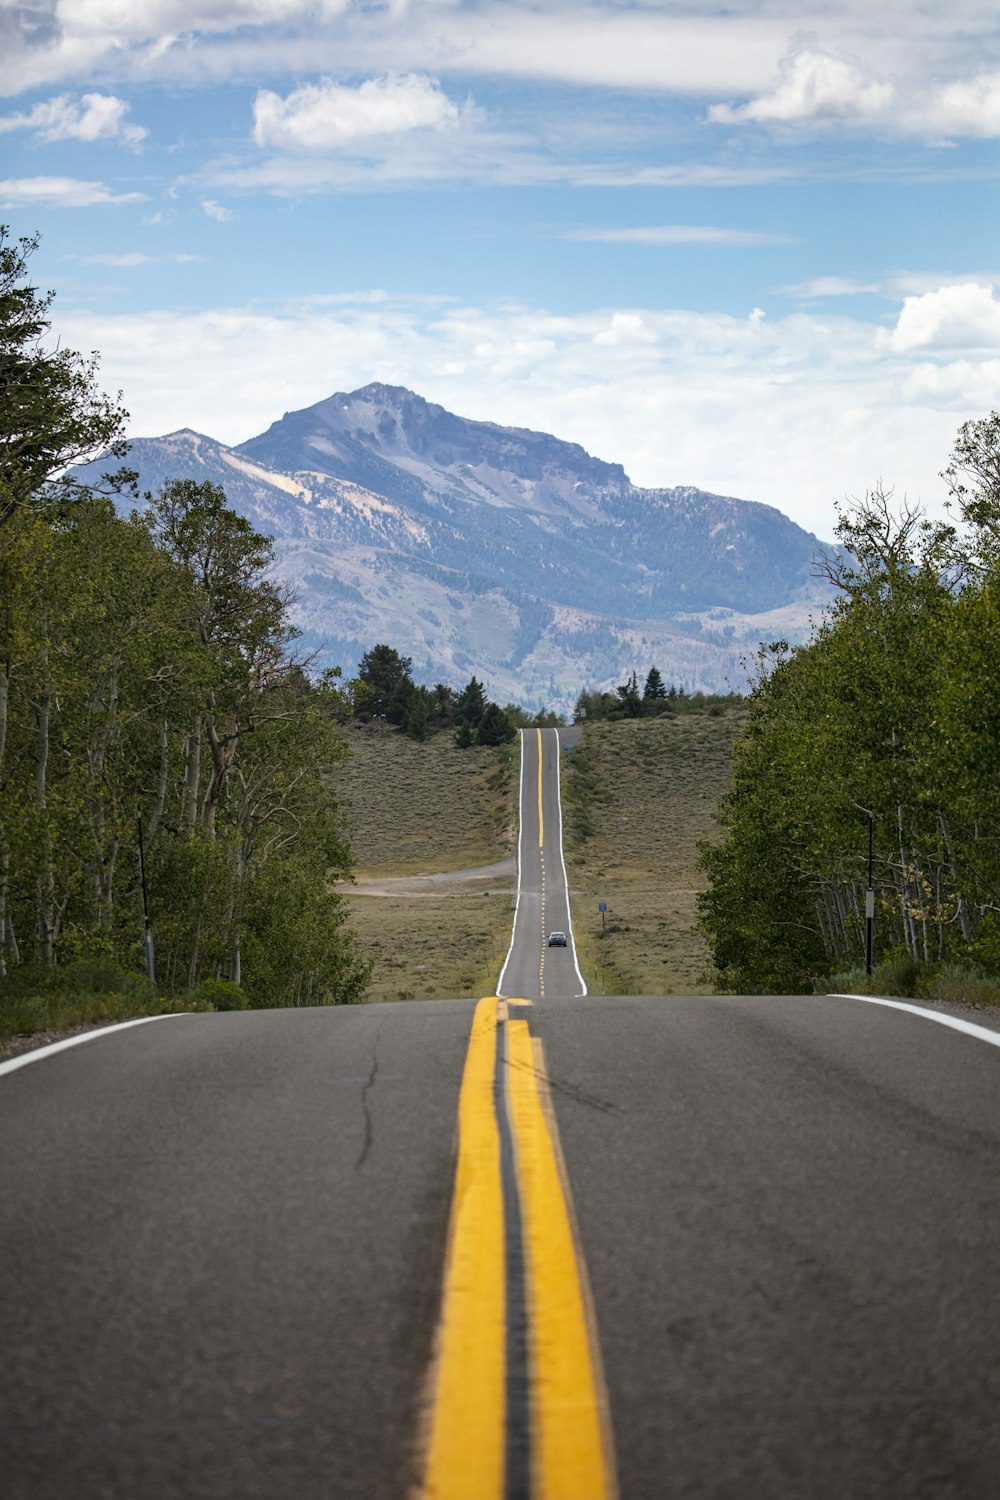 a long straight road with a mountain in the background